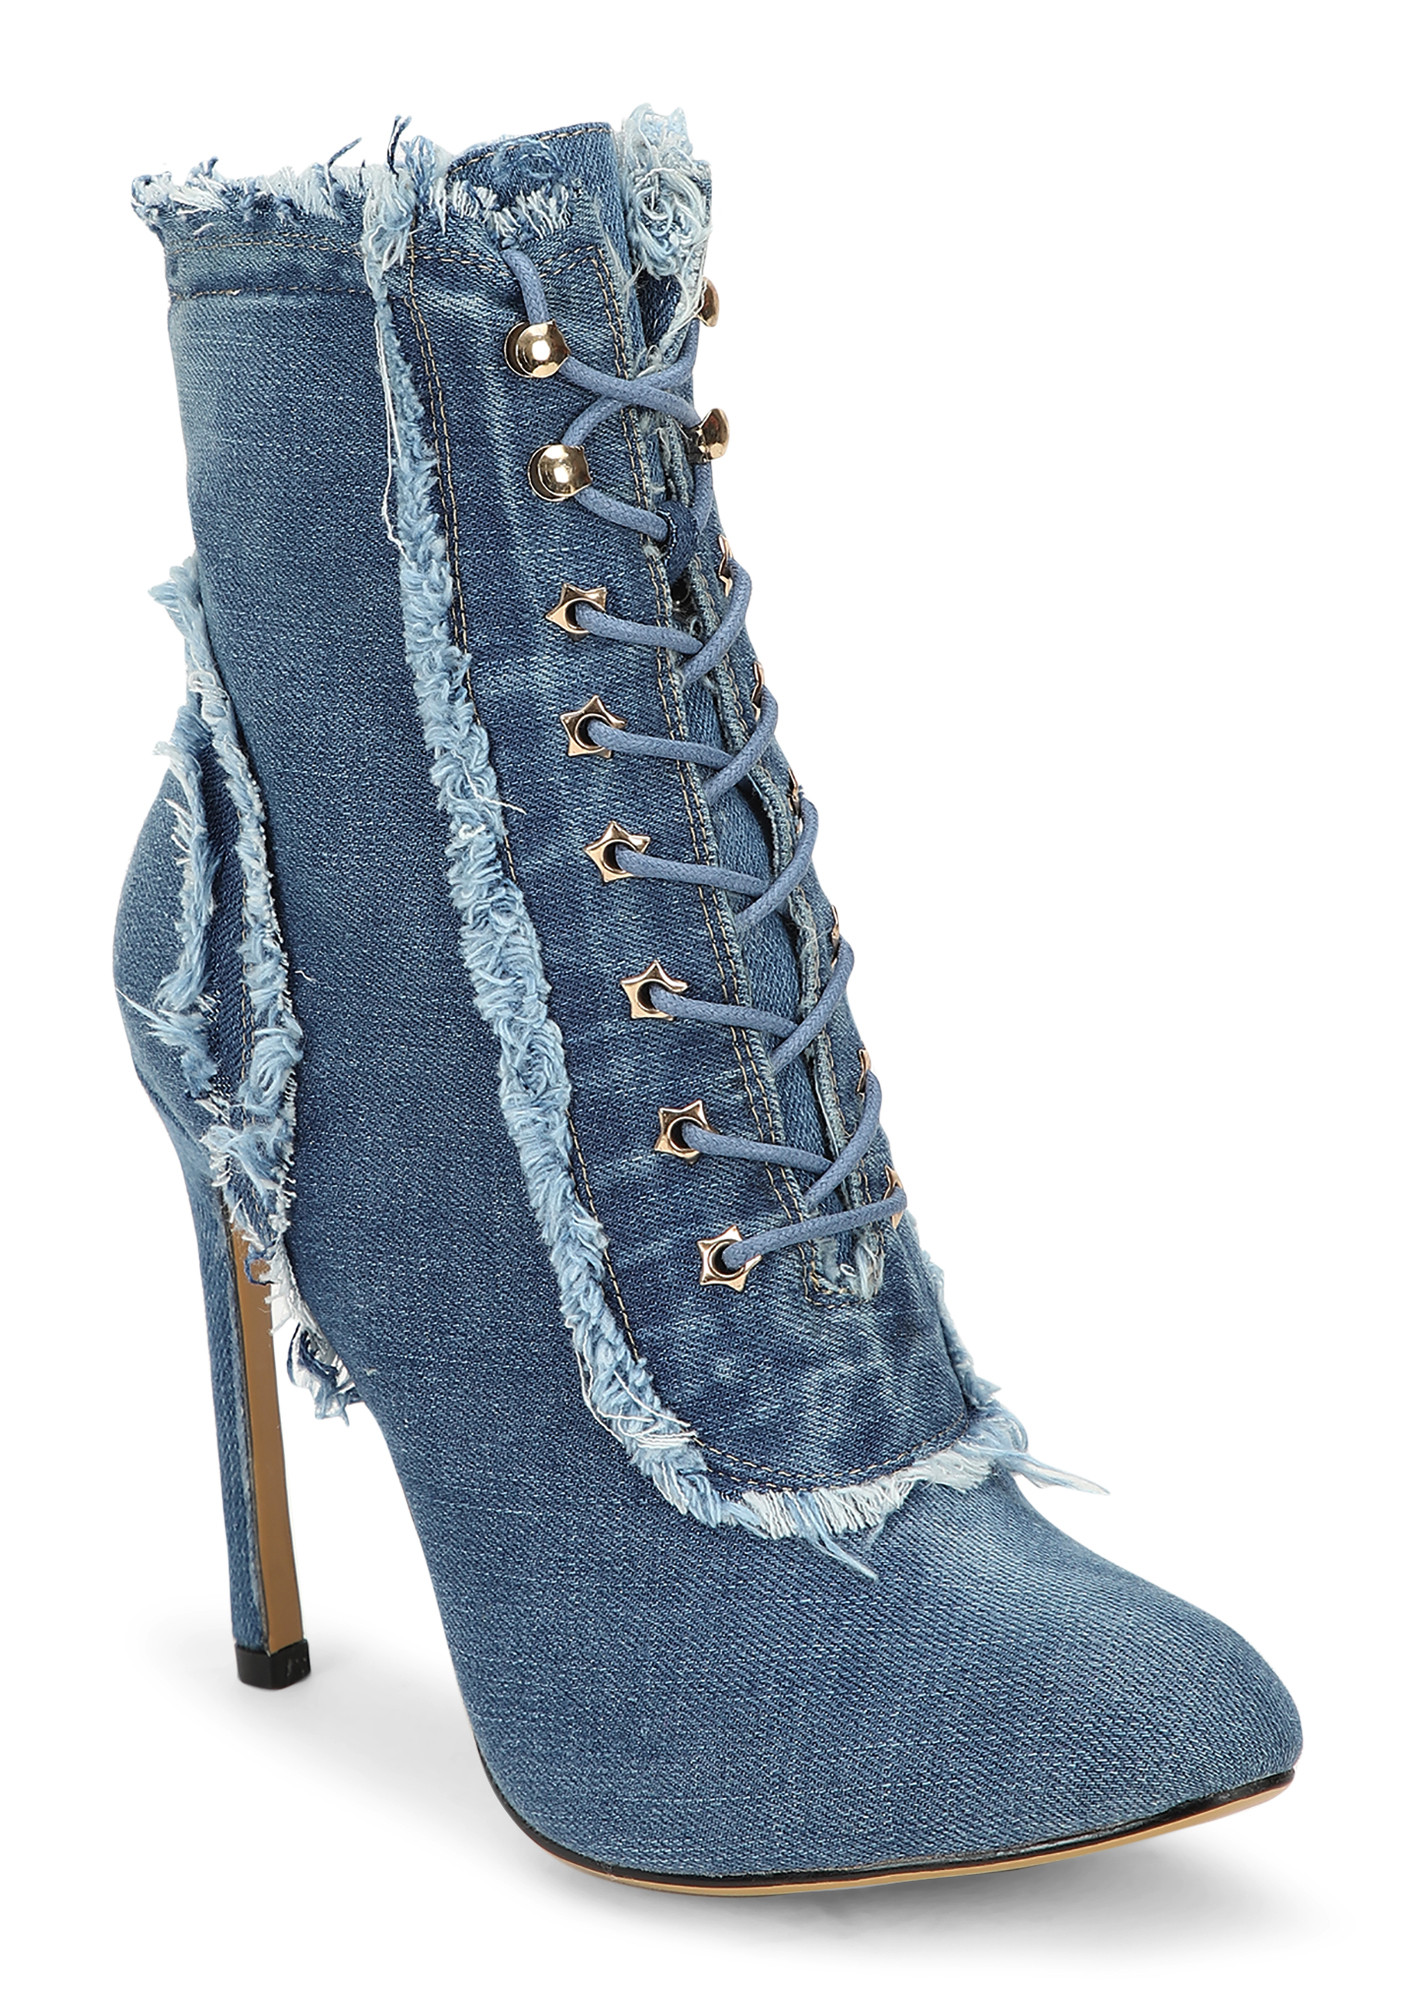 DO THE DENIM DUO DARK BLUE ANKLE BOOTS